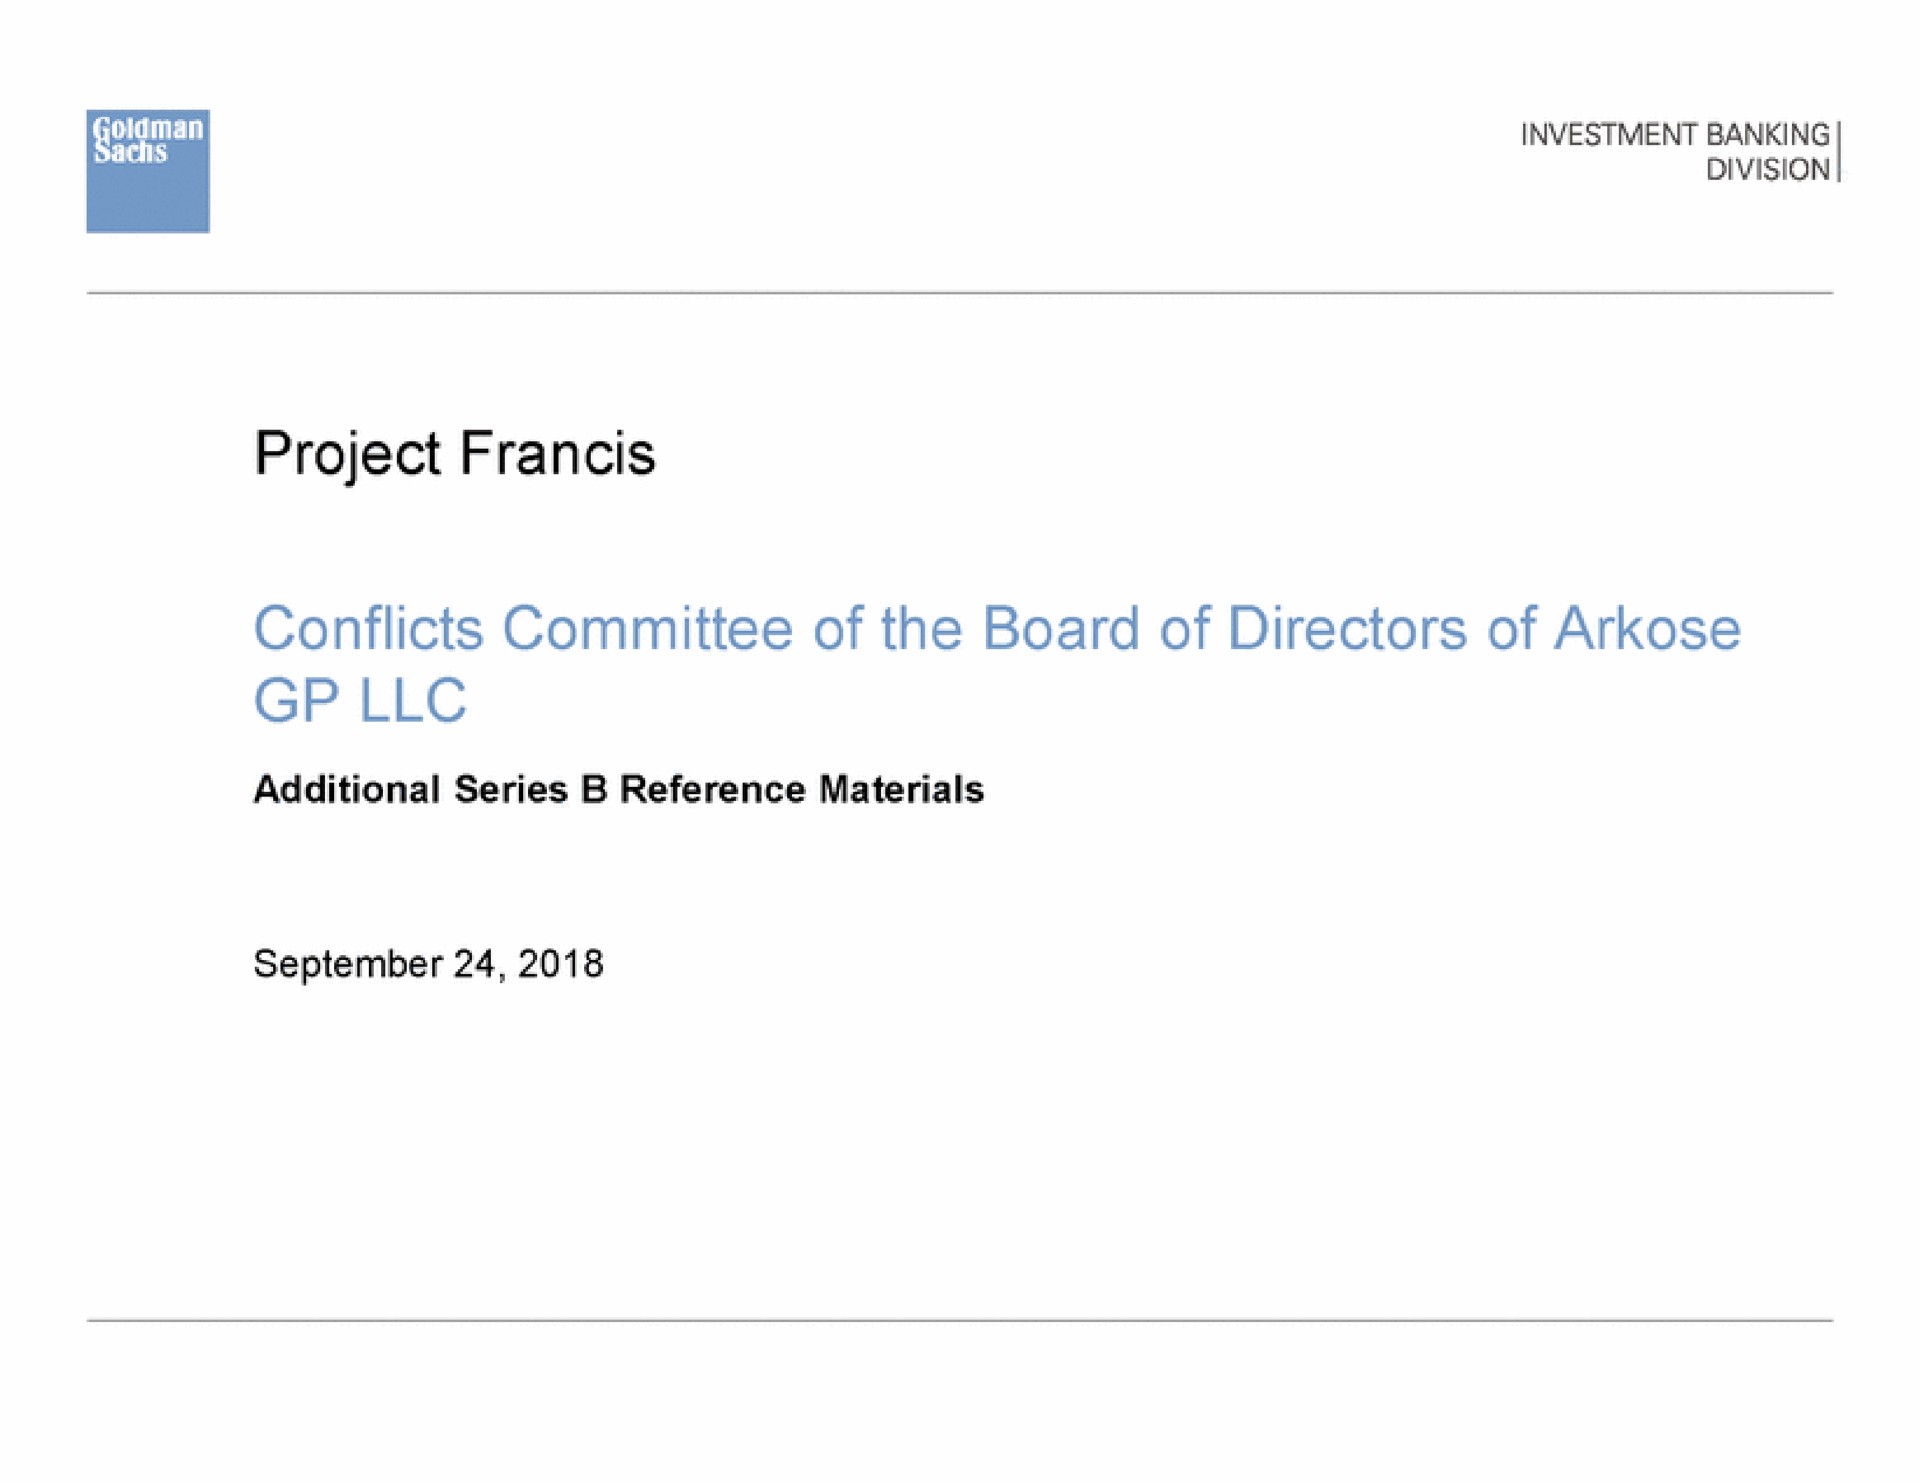 project conflicts committee of the board of directors of arkose | Goldman Sachs